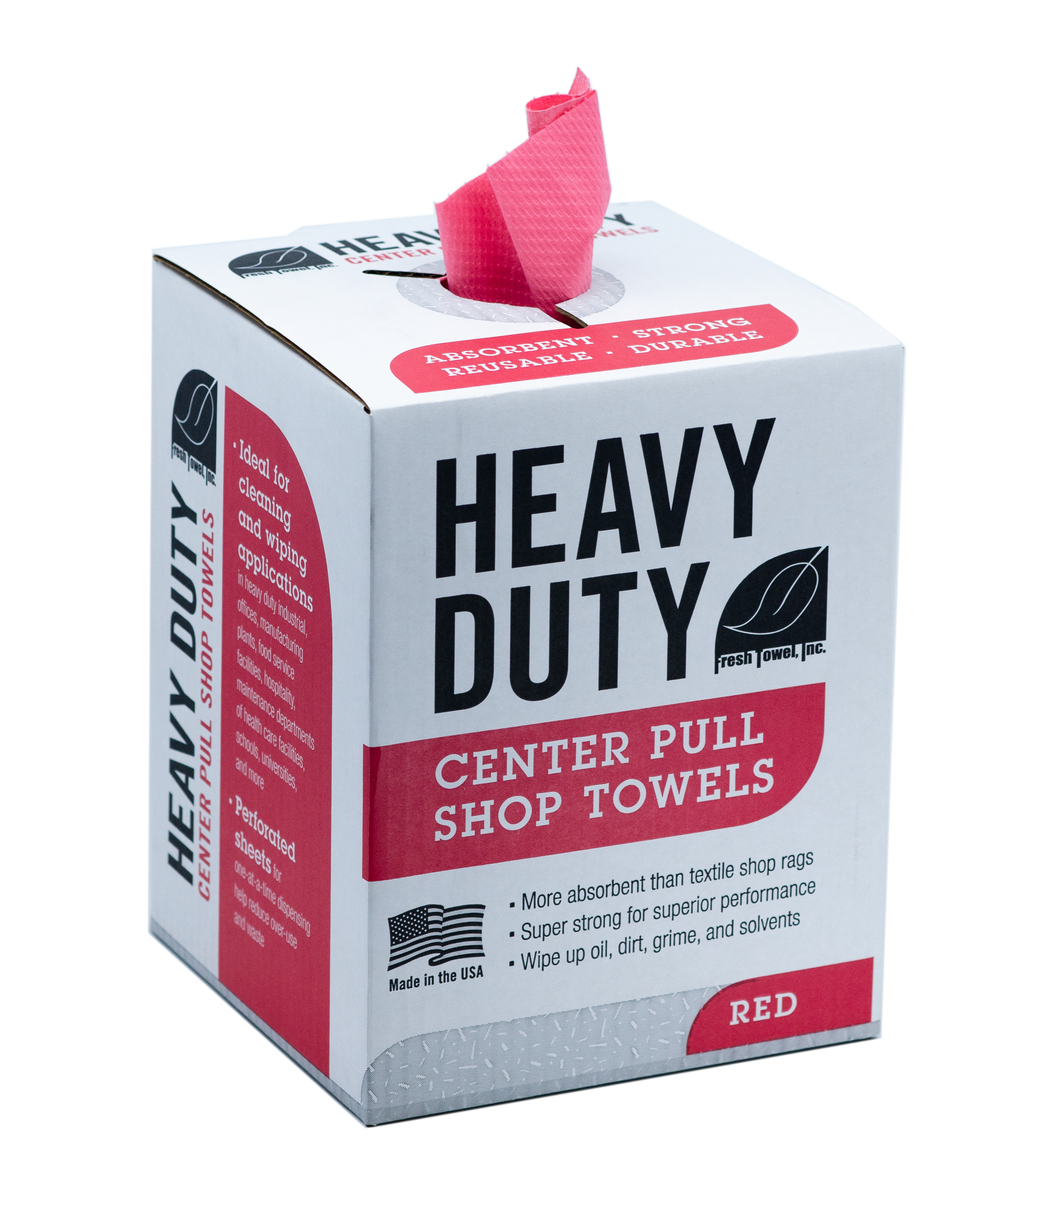 Heavy Duty Shop Towels Center Pull - MAX STRENGTH - 160 Sheets - 9 x 12 inches